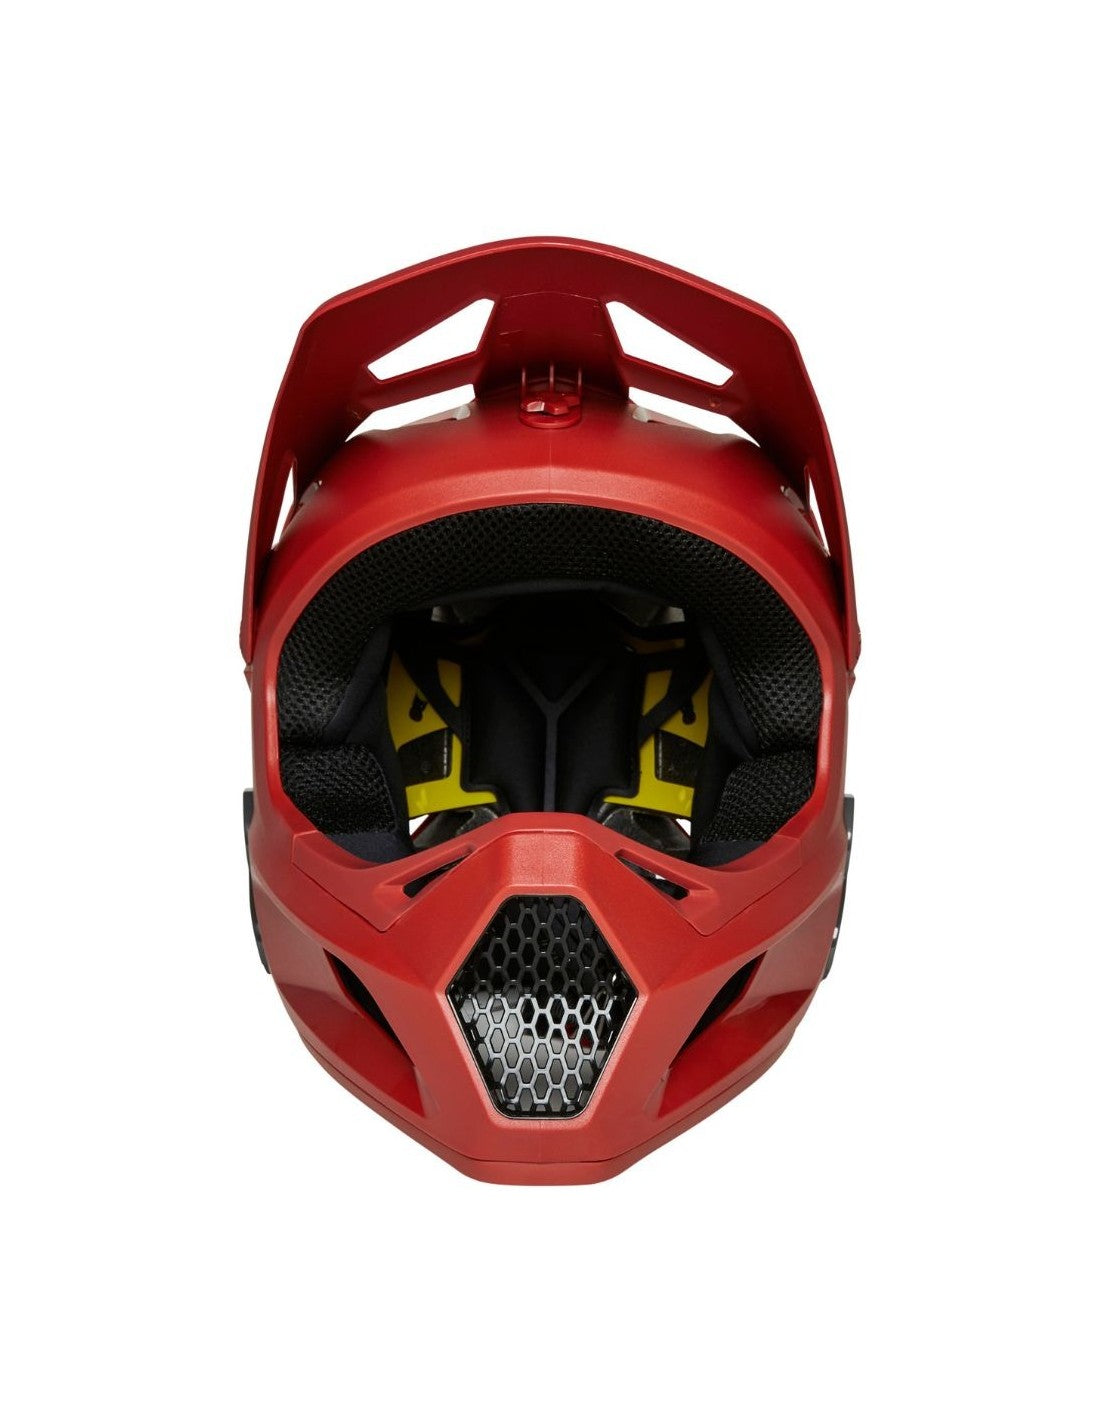 Casco Full-Face Fox Rampage Con Mips - Red